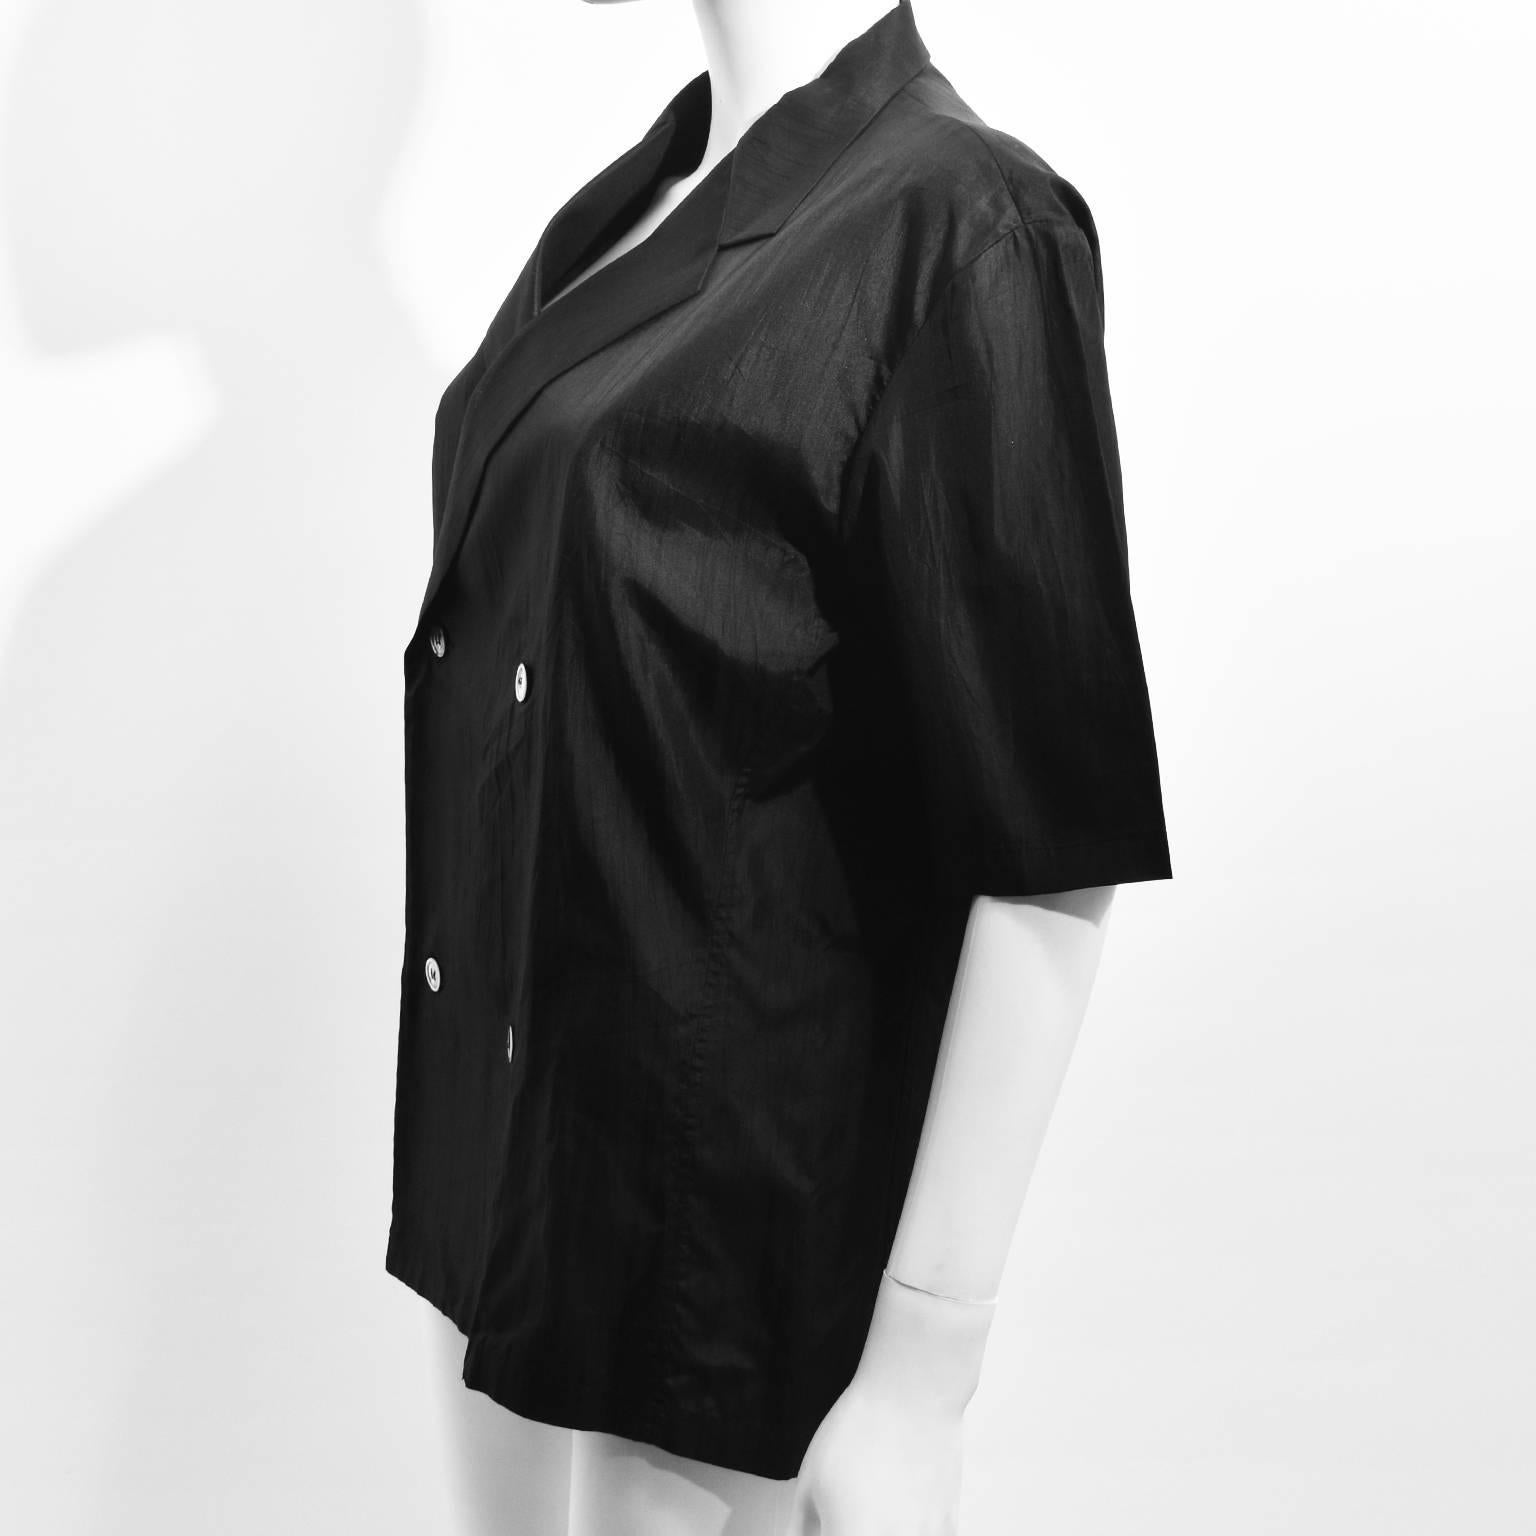 A black silk double-breasted shirt by Yohji Yamamoto featuring short sleeves and a boxy fitted cut. A size M, the shirt is in perfect condition.